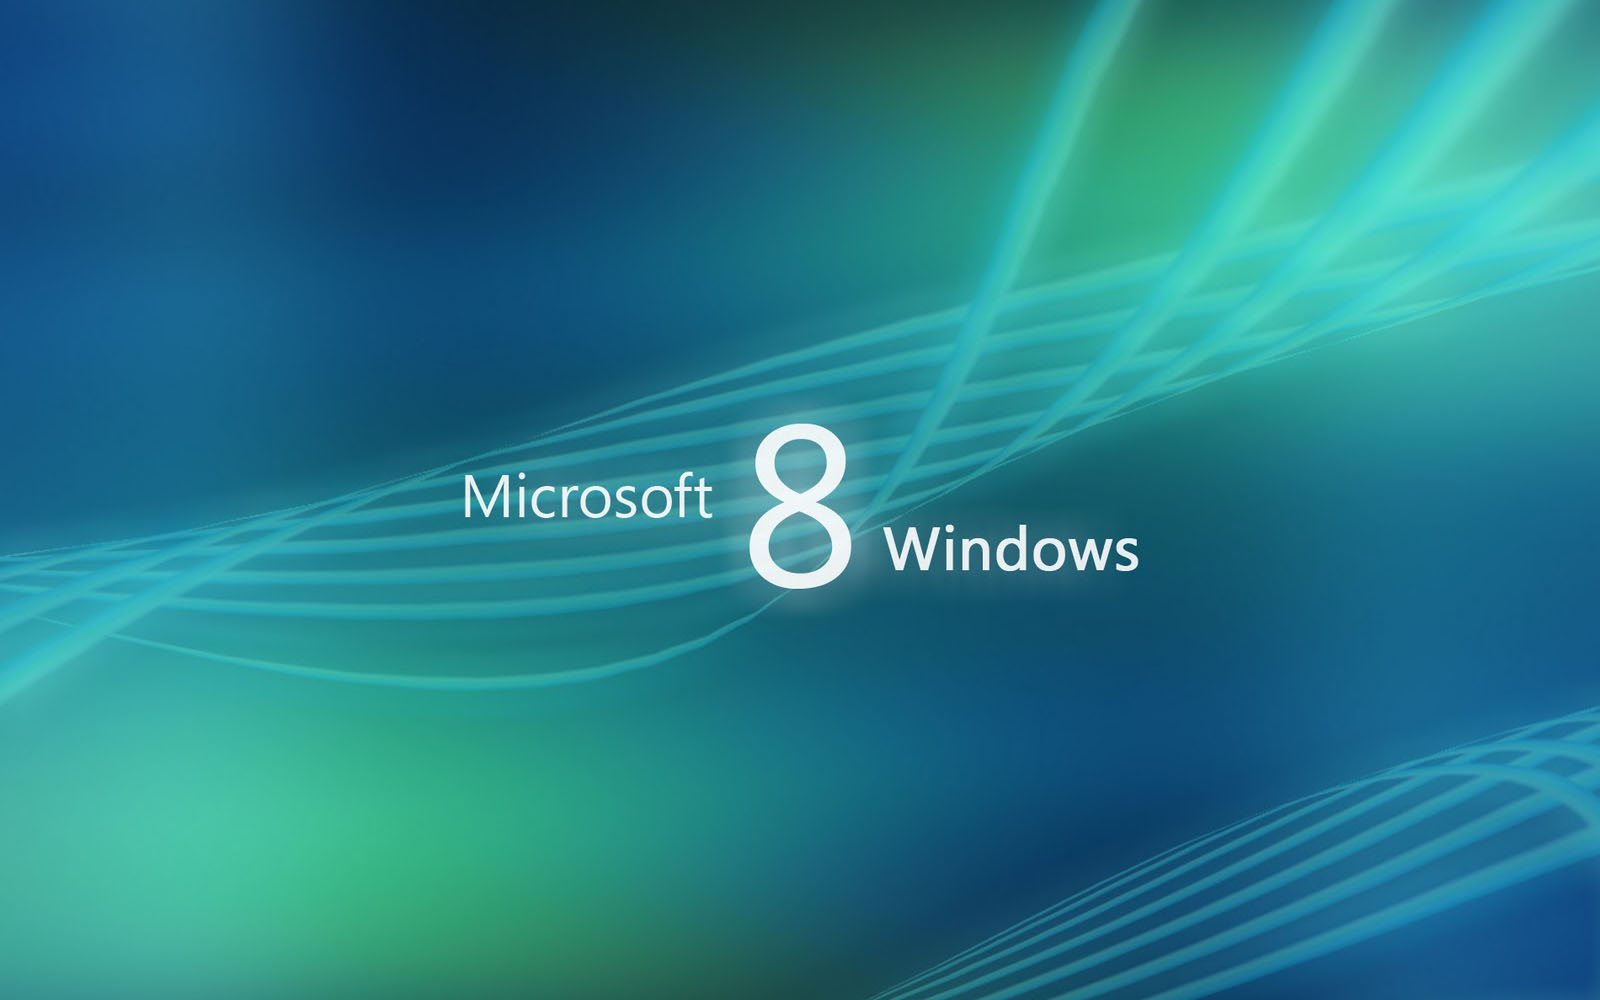  Free Windows 8 Background Wallpapers Windows 8 Background